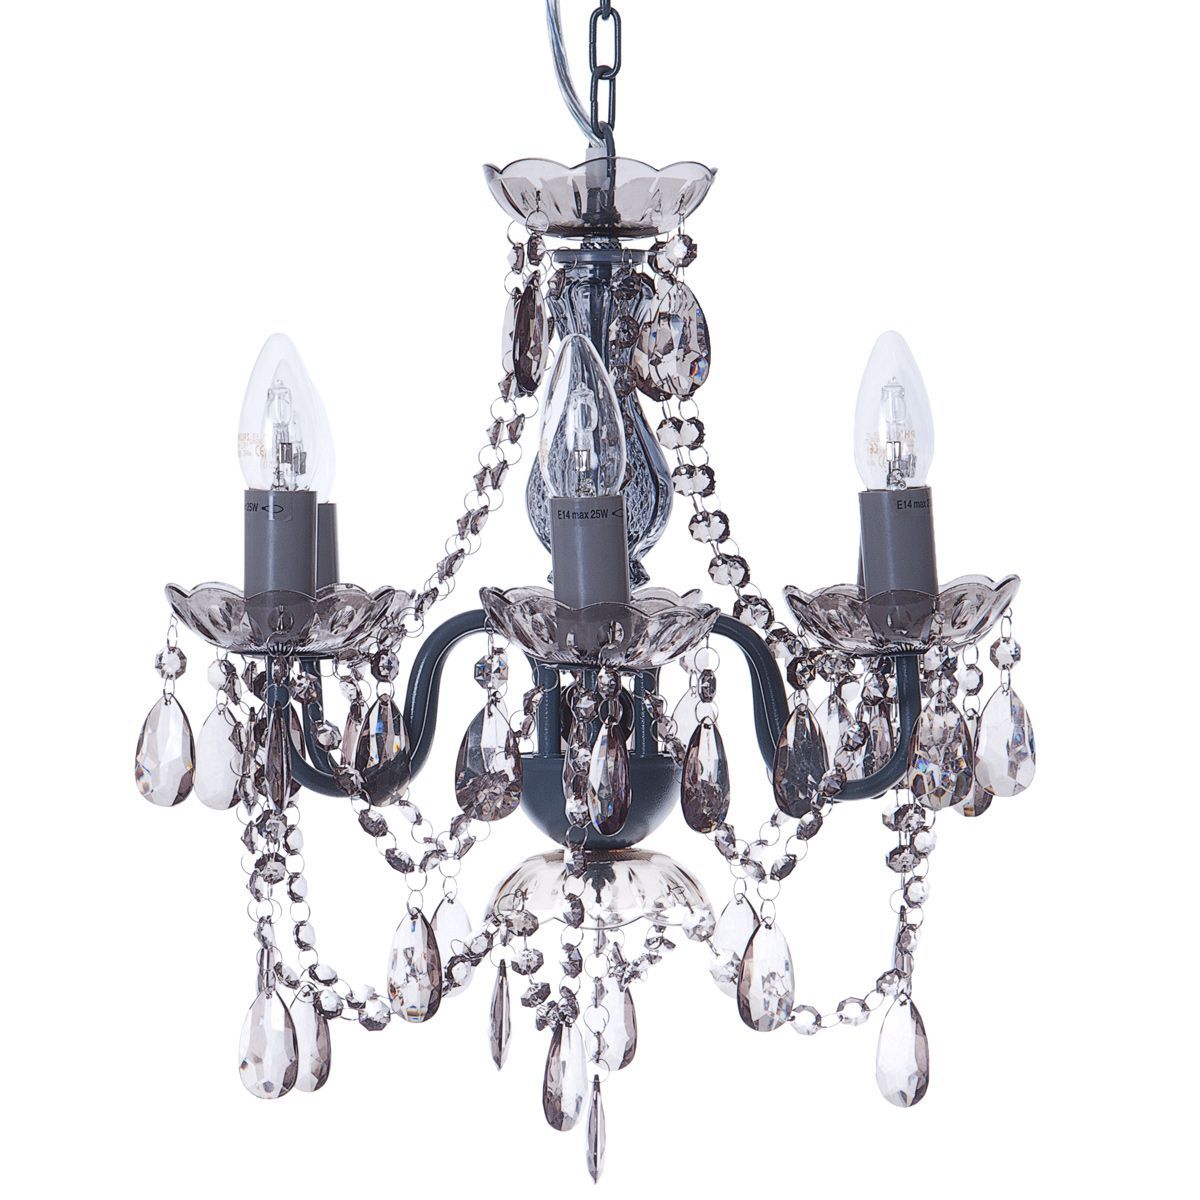 Win £200 Towards Romancing Your Home Décor From The French Regarding Blanchette 5 Light Candle Style Chandeliers (View 24 of 30)